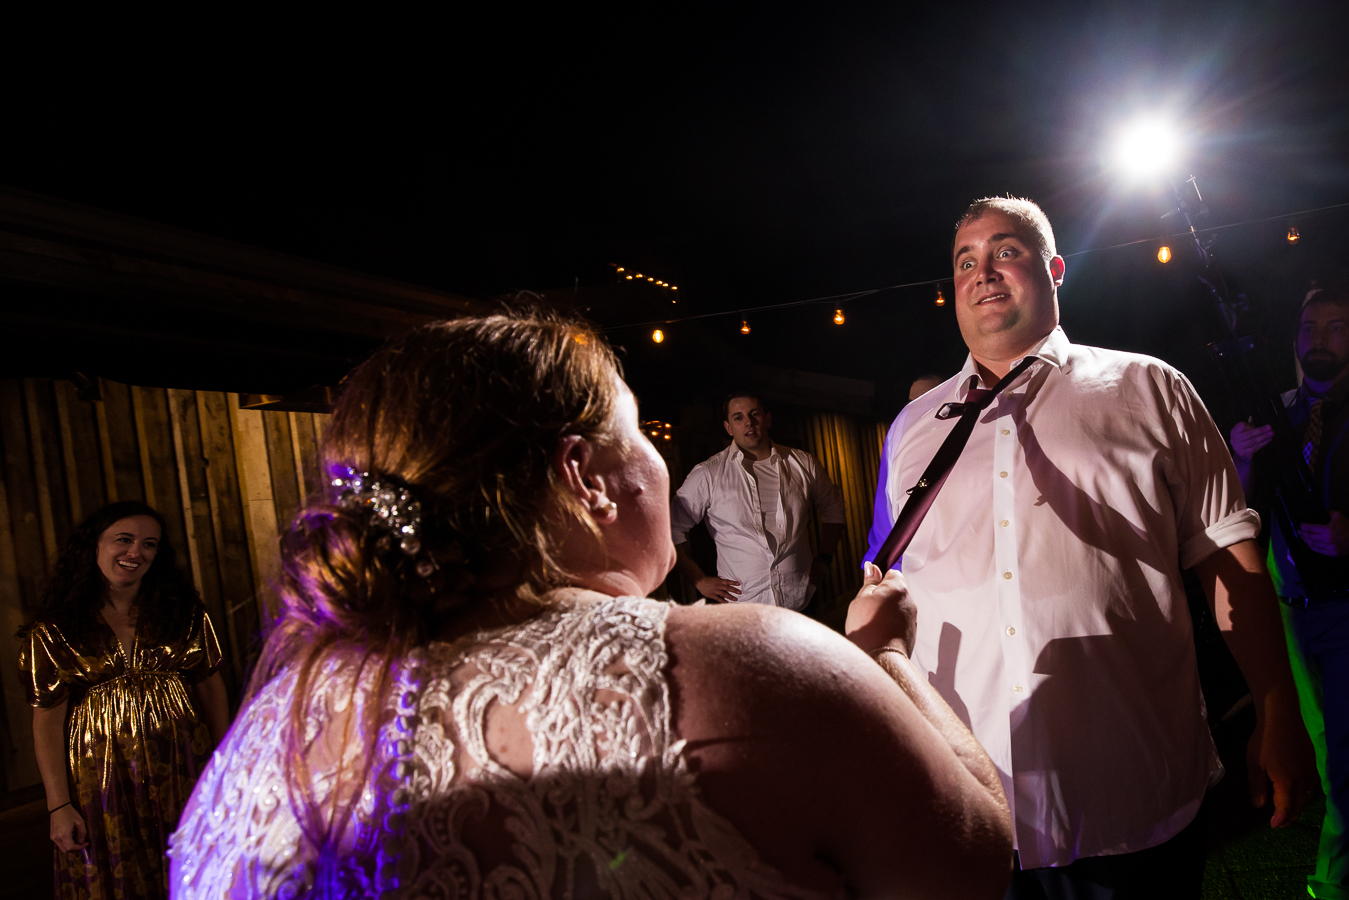 creative, fun image captured by fun reception photographer, lisa rhinehart, from this outdoor wedding reception of the couple as they dance with each other and the brides pulls the grooms tie 